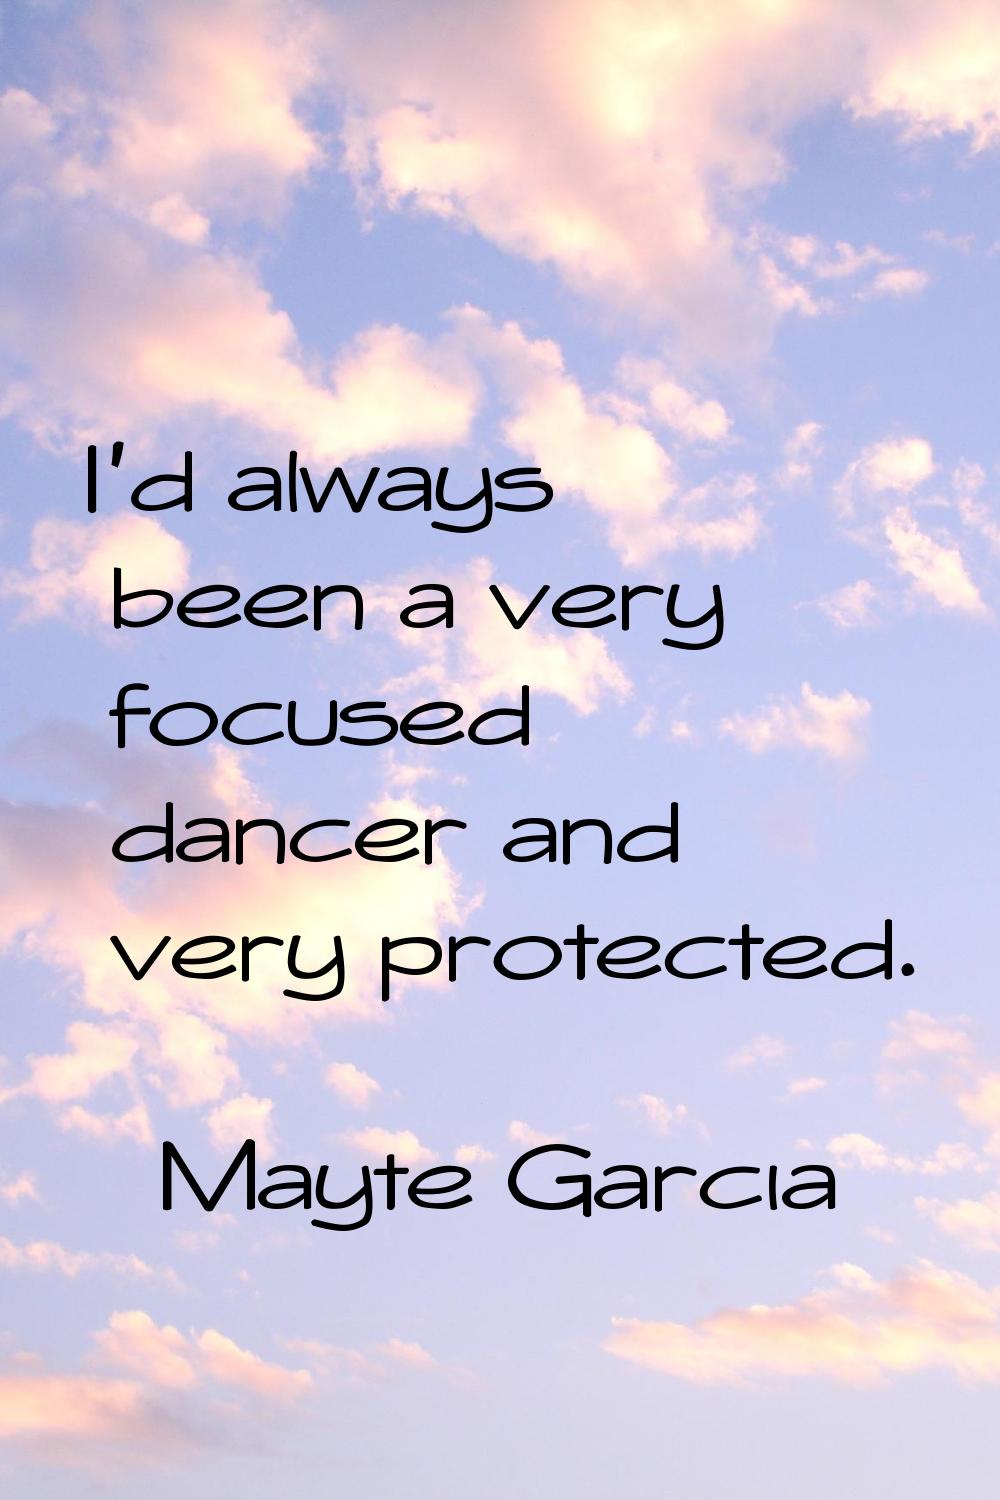 I'd always been a very focused dancer and very protected.